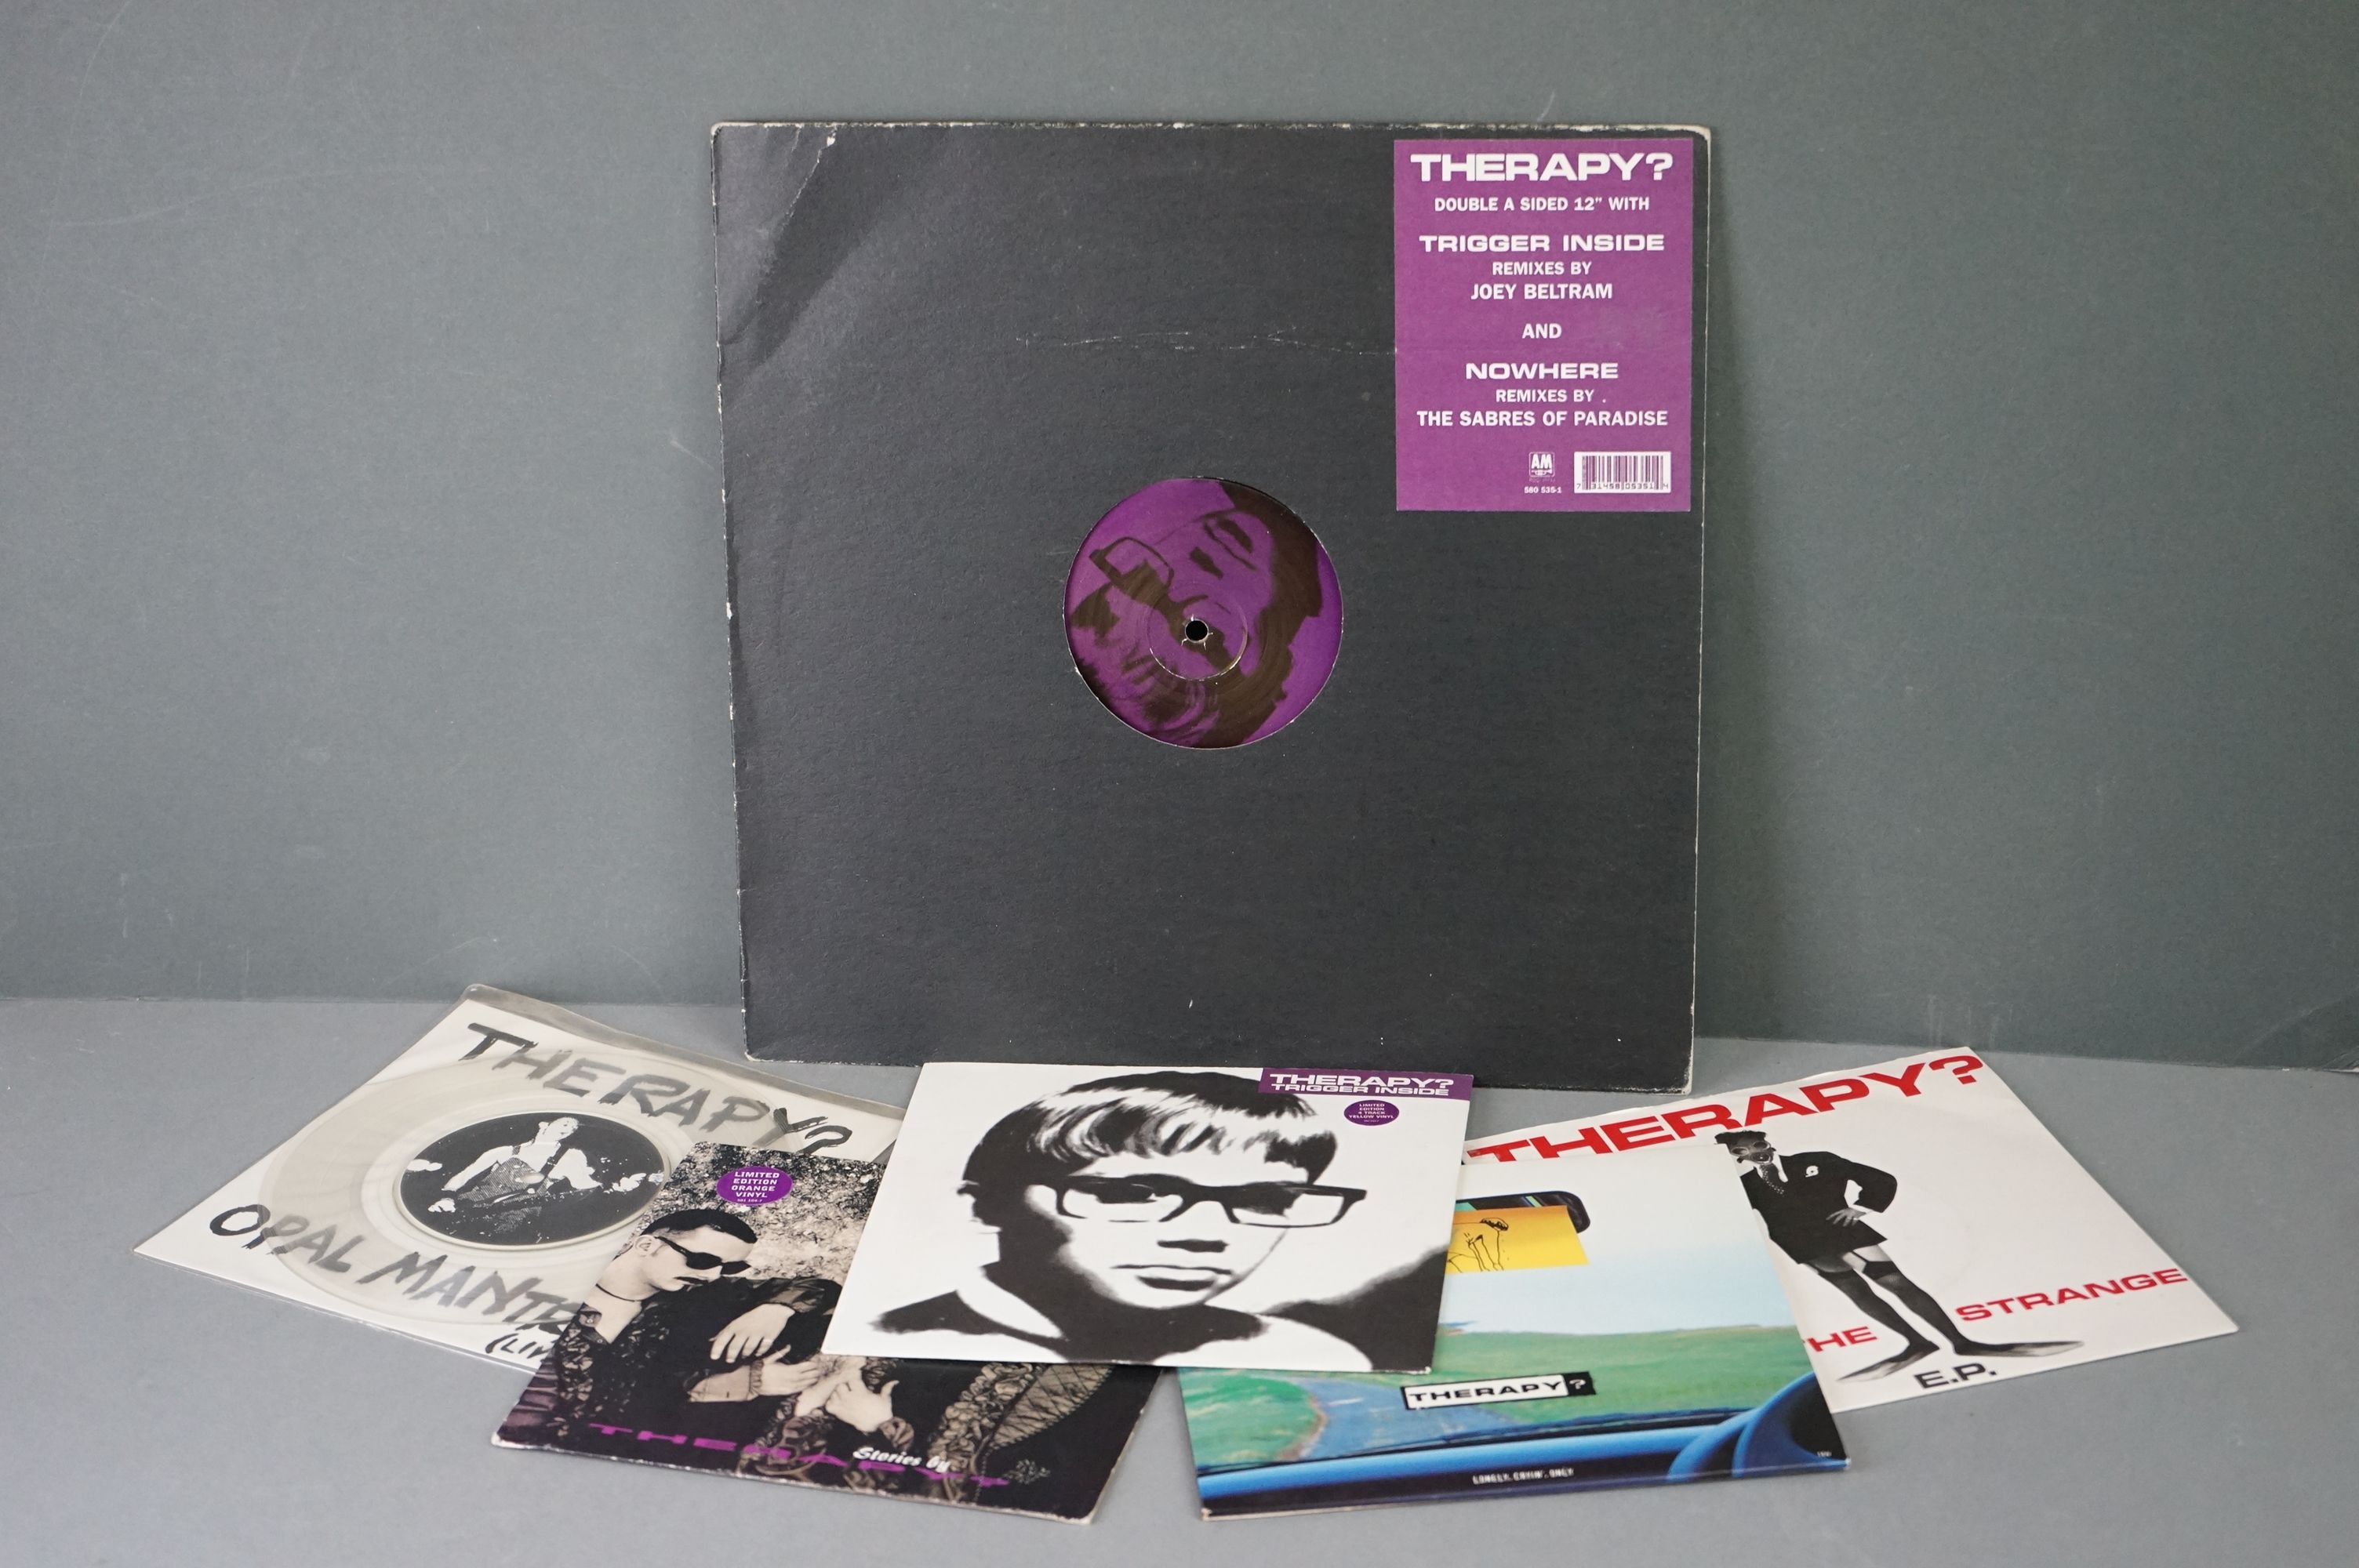 Vinyl - Therapy? - Trigger Inside Remixes 12 2 single plus 5 x 7" singles to include Opal Mantra (